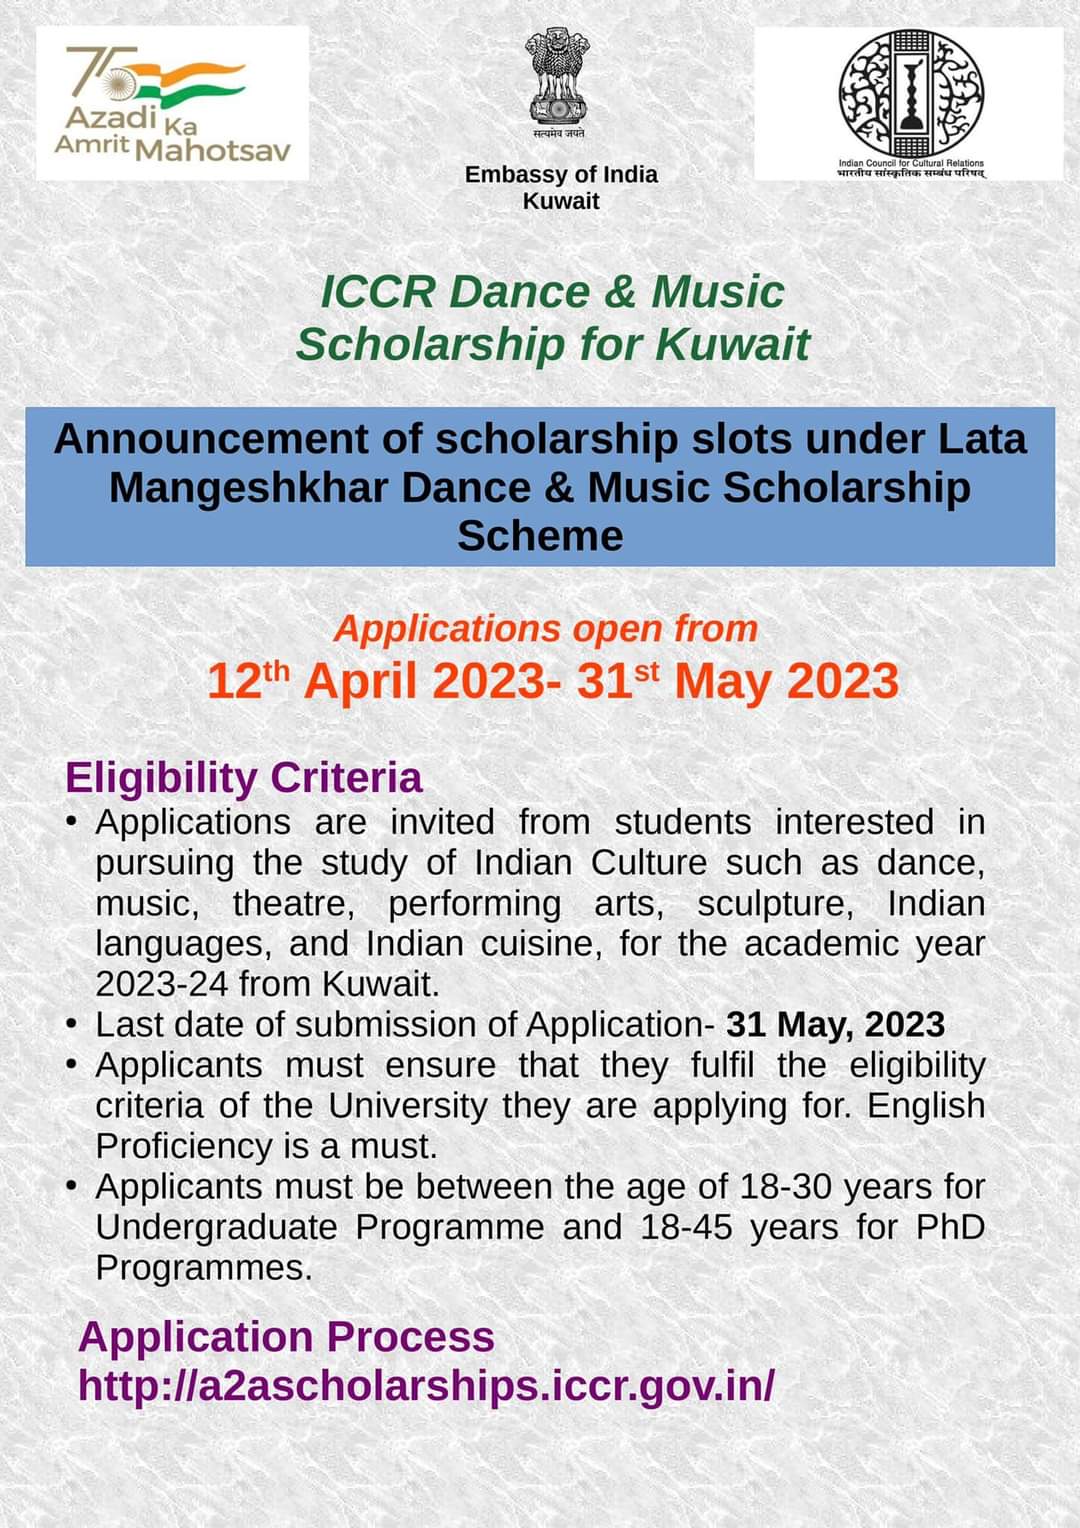 Apply Online for ICCR Scholarship | Indian Embassy in Kuwait | Dance & Music Scholarship